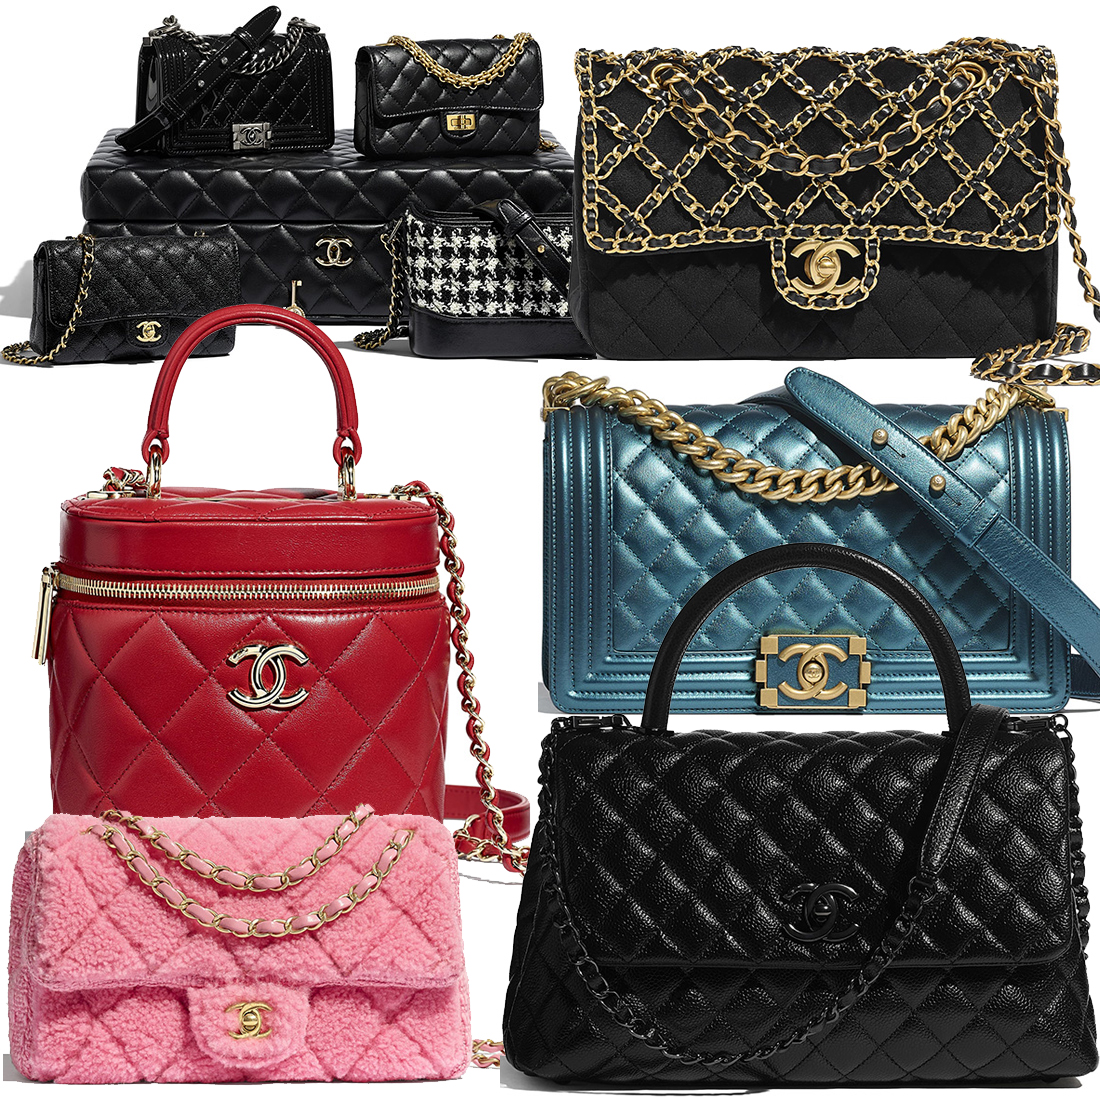 Chanel Pre-Fall 2020 Bag Classic Collection